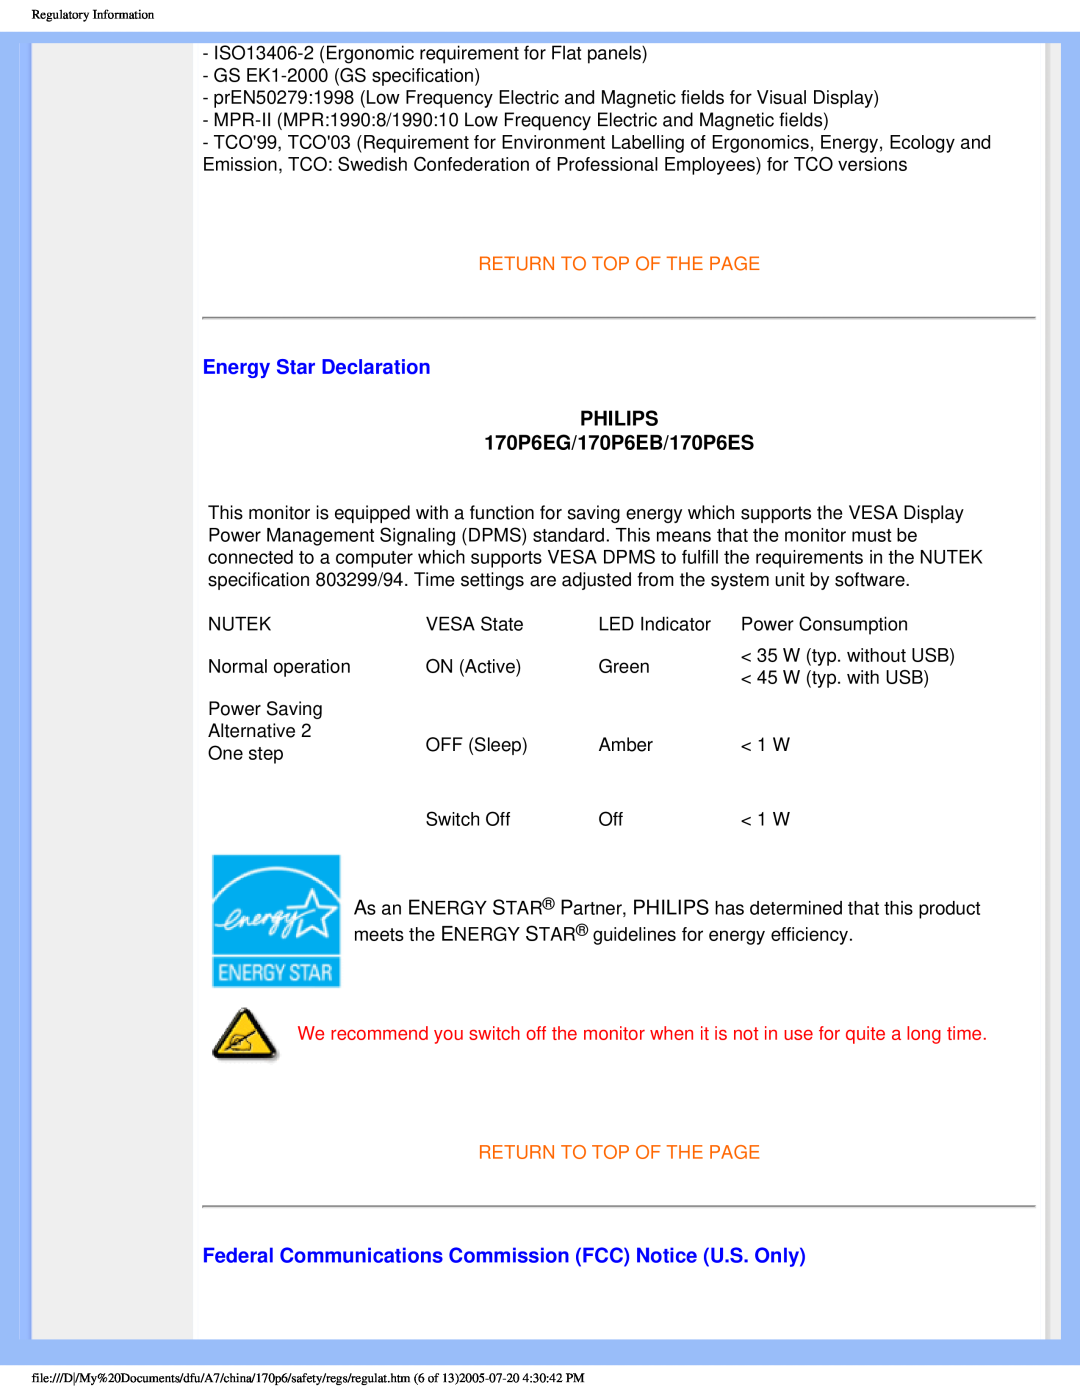 Philips R6RY0 user manual Energy Star Declaration, PHILIPS 170P6EG/170P6EB/170P6ES, Return To Top Of The Page 